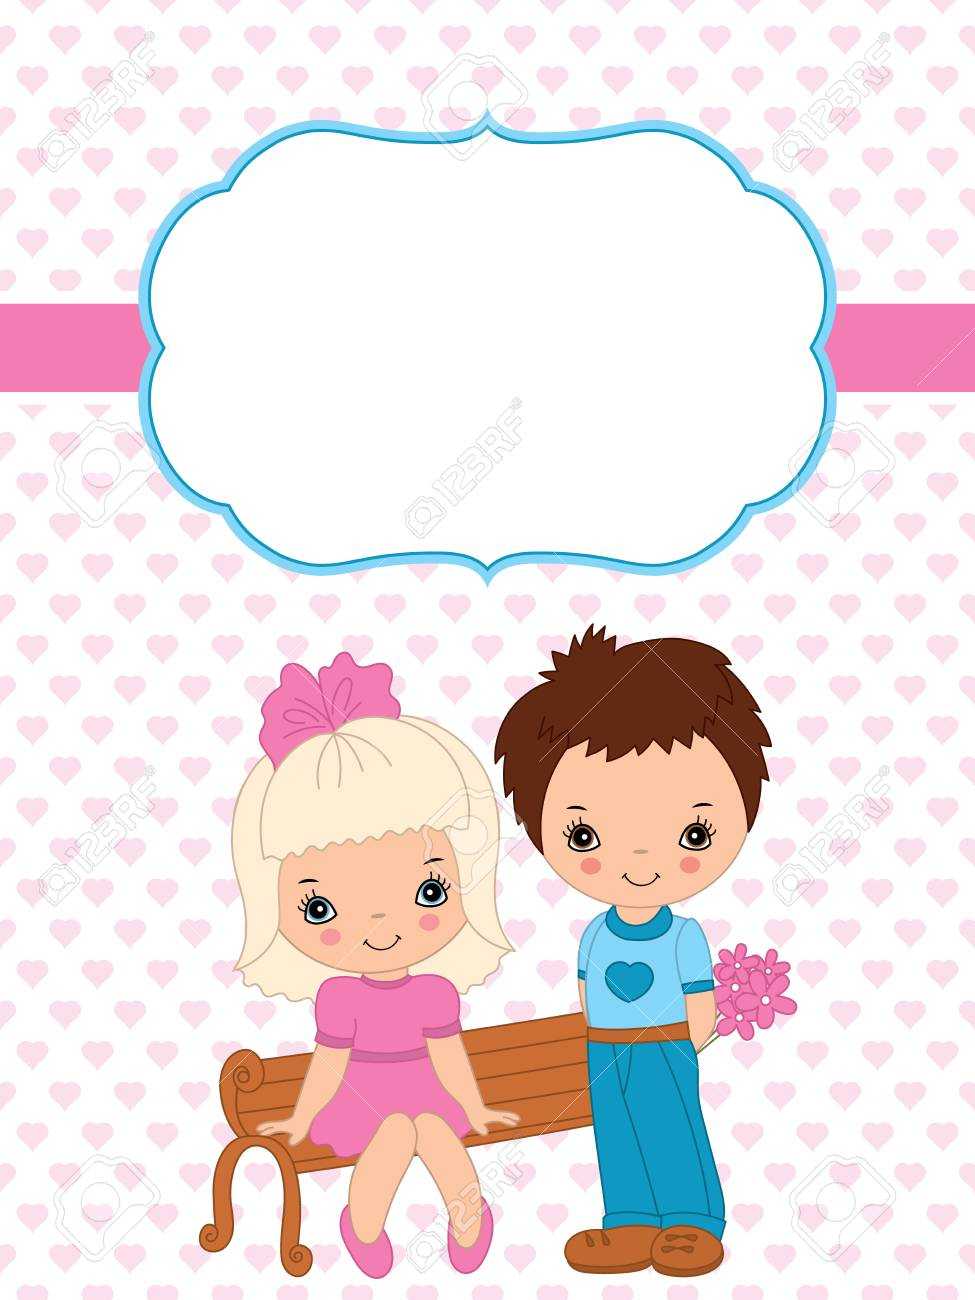 Valentine's Card Vector Template With Cute Little Kids On Hearts.. With Valentine Card Template For Kids